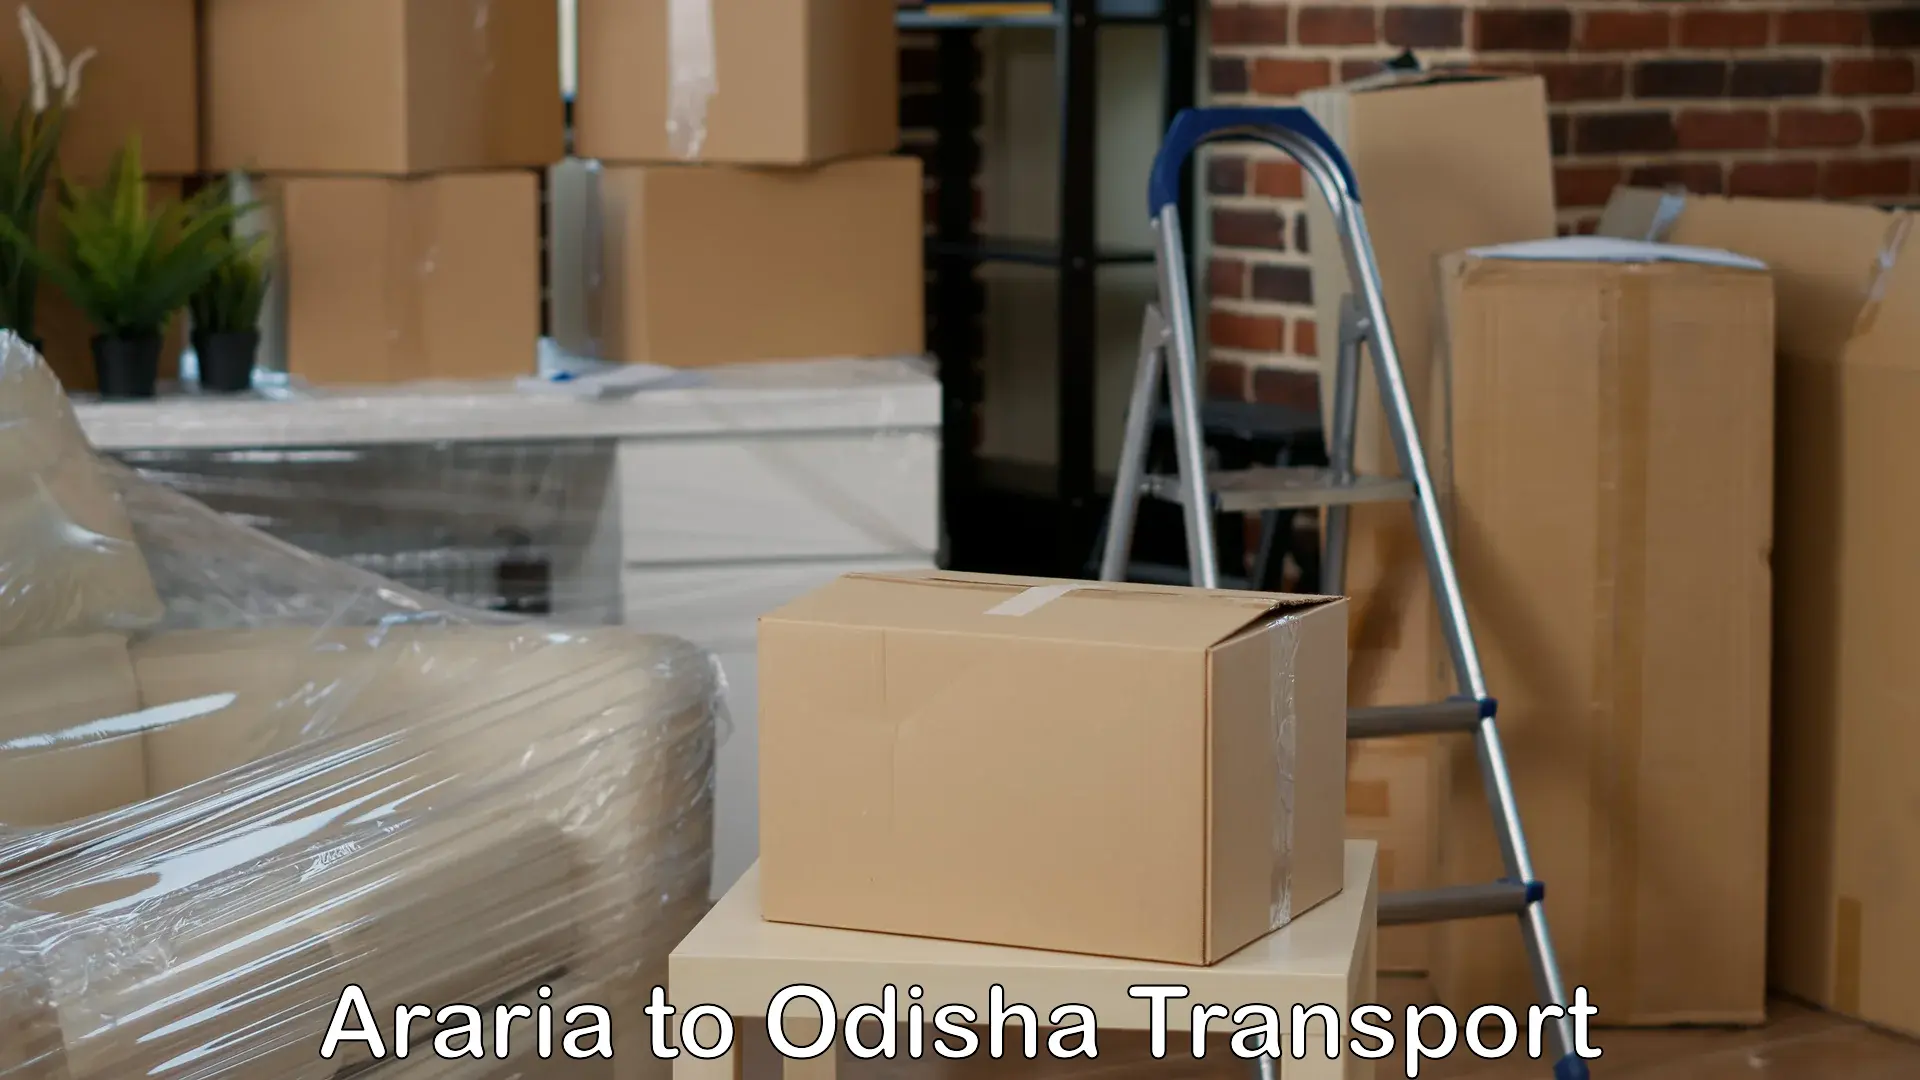 Truck transport companies in India Araria to Bamra